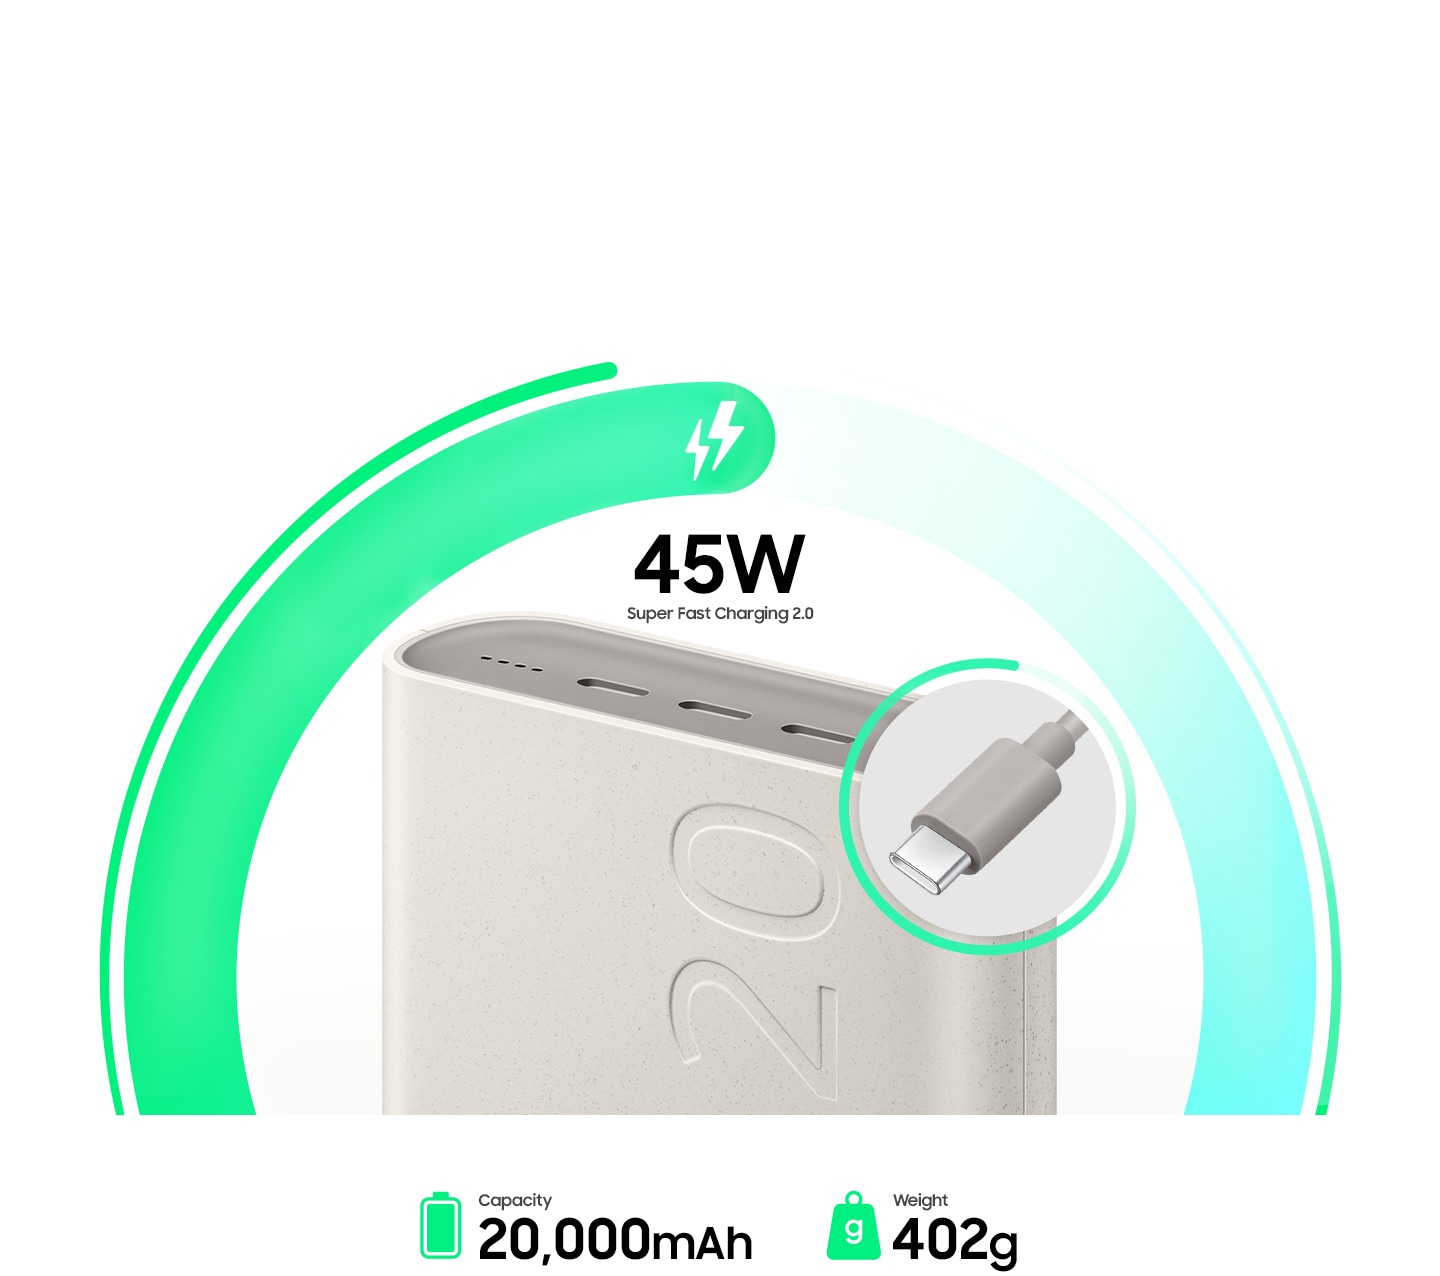 Close-up of the top edge of a light grey portable battery pack. Text above the battery reads '45W Super Fast Charging 2.0', indicating the device's rapid charging capability. Close-up view of a grey USB-C cable connector, highlighting its sleek design.